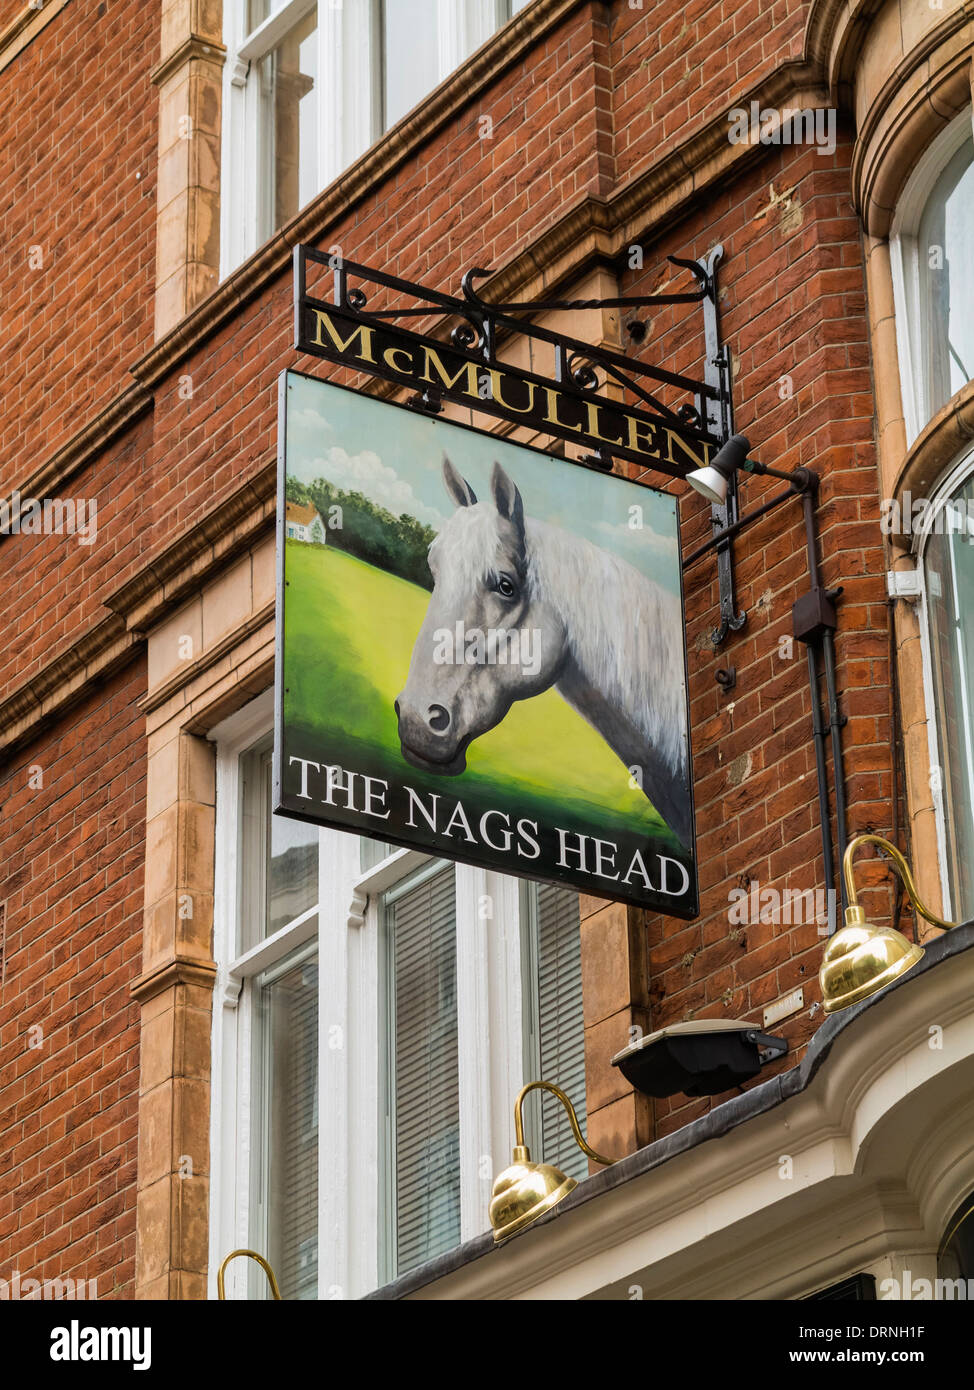 The Nags Head pub sign in London, England, UK Stock Photo